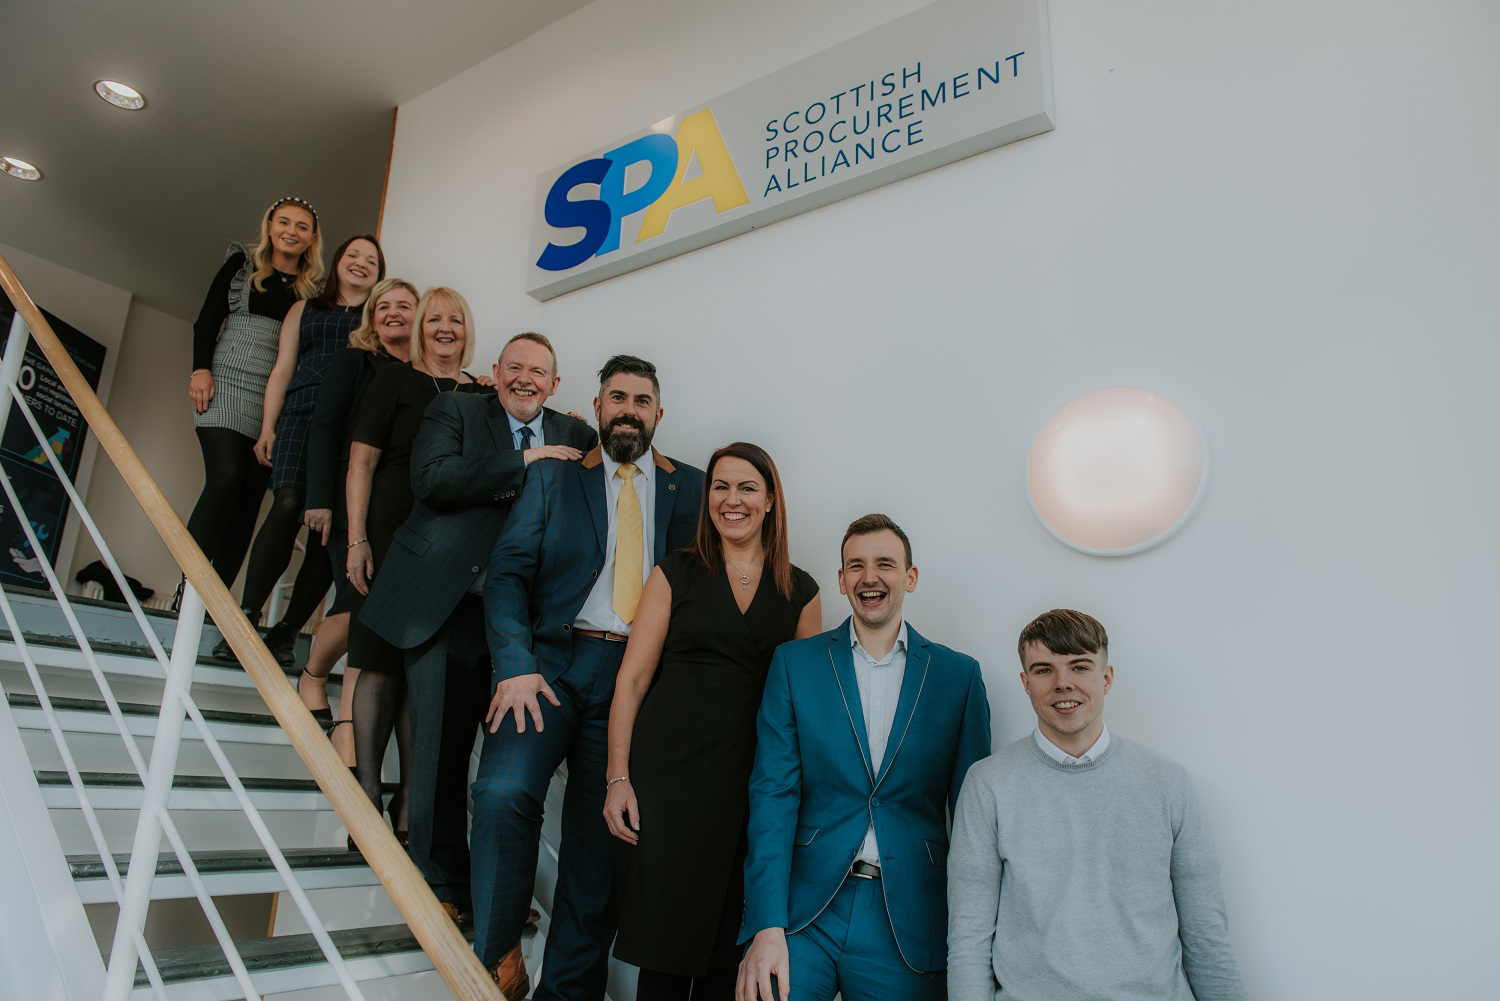 Near 50% jump in value of projects delivered by Scottish Procurement Alliance